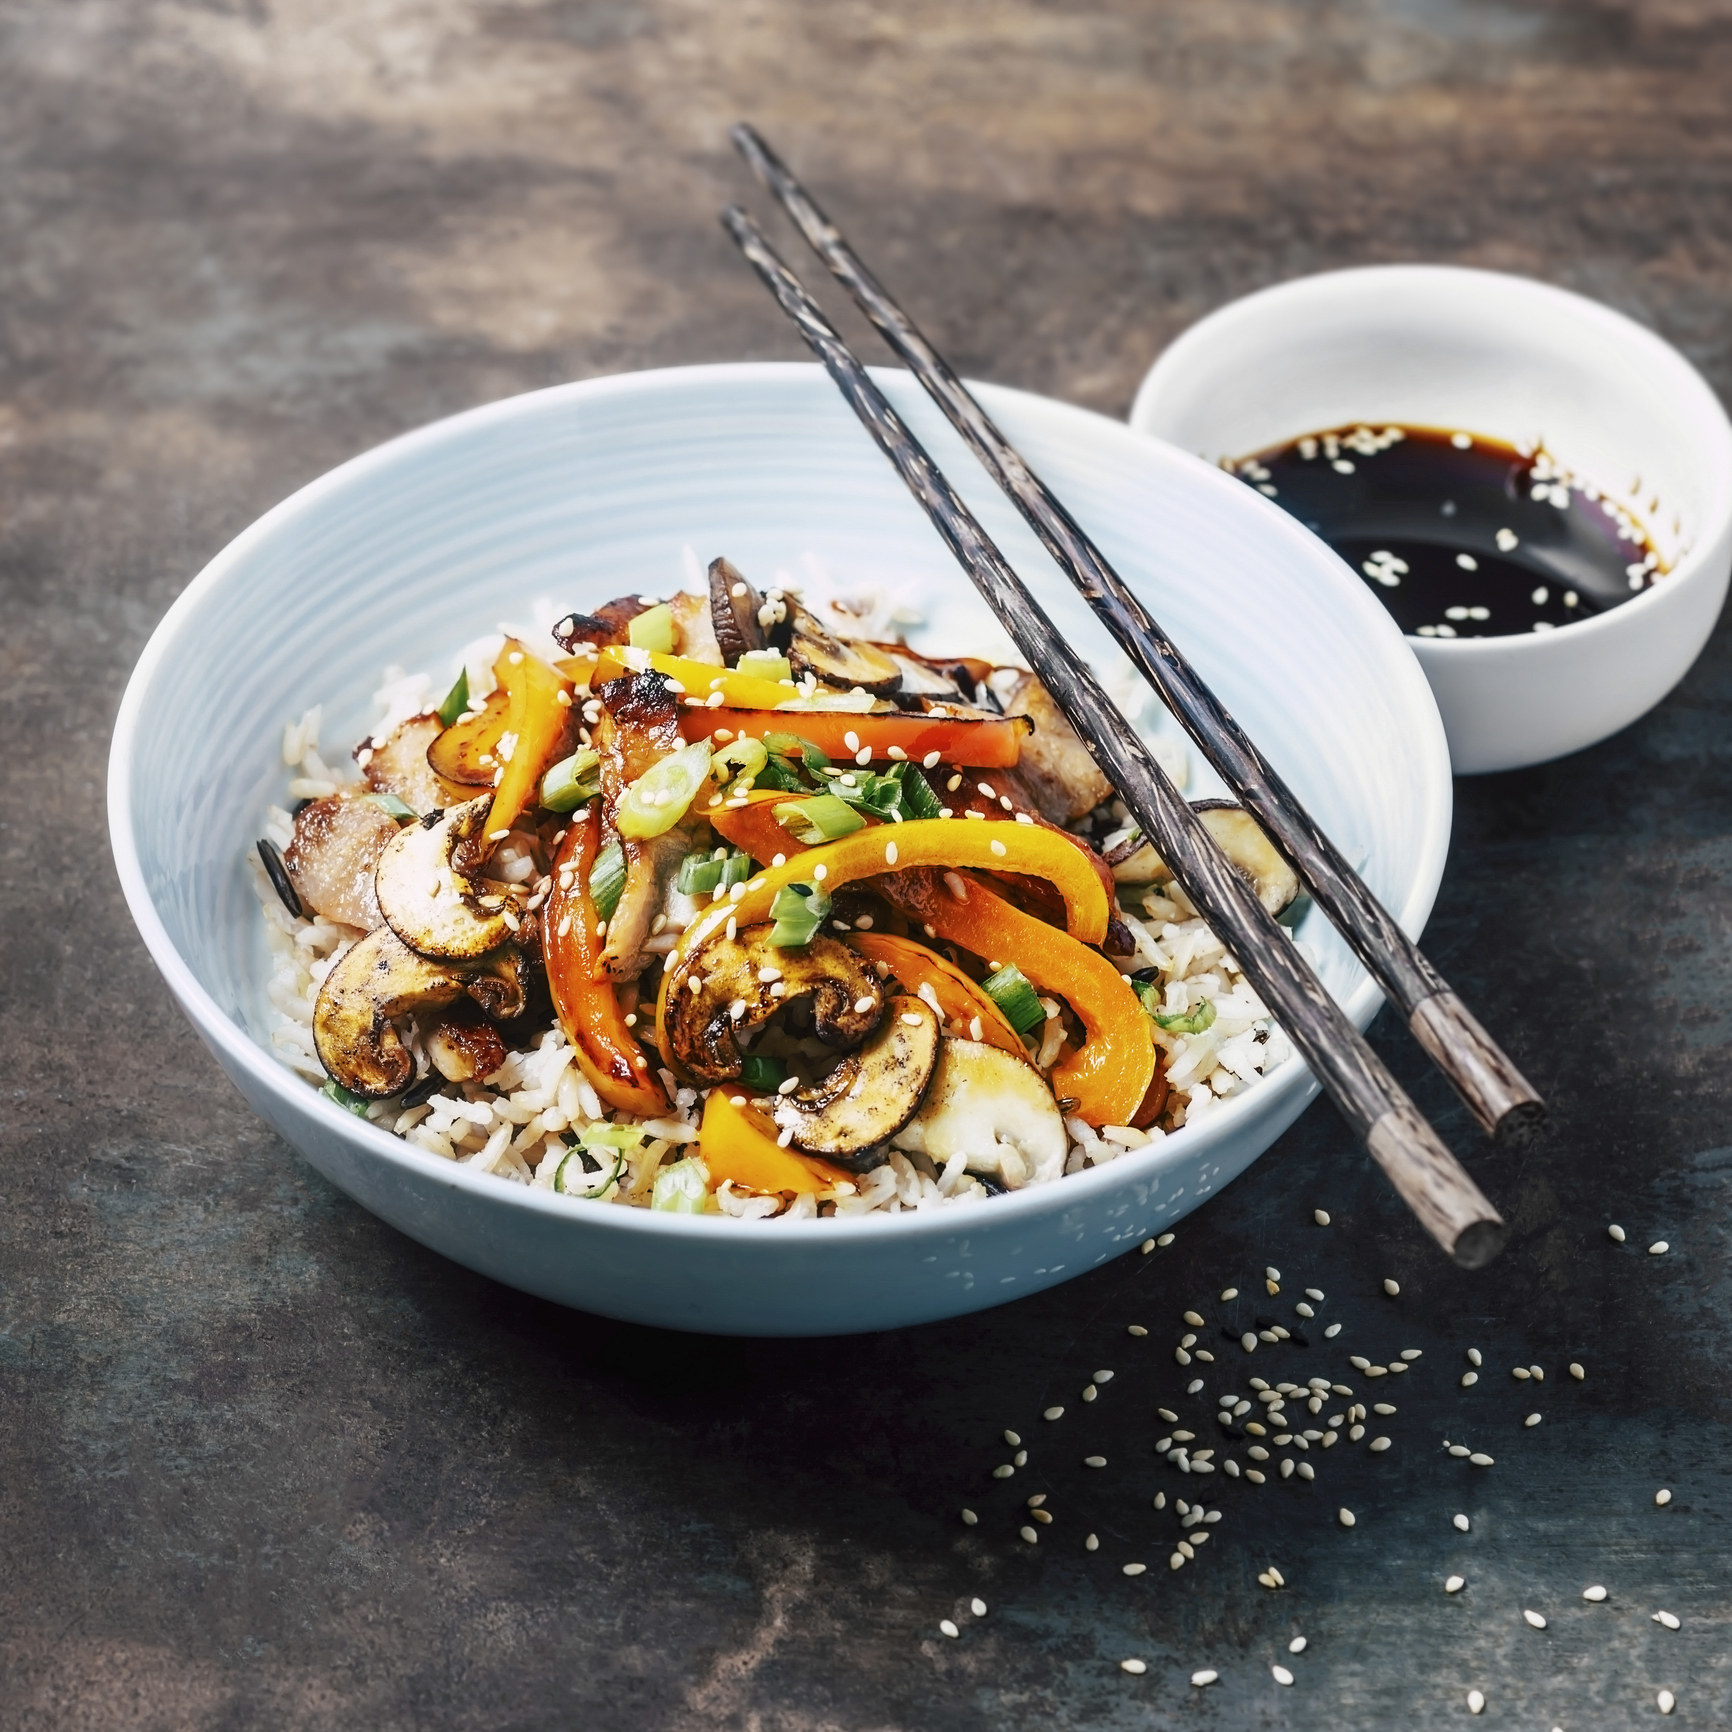 Vegetable stir-fry over rice with soy sauce